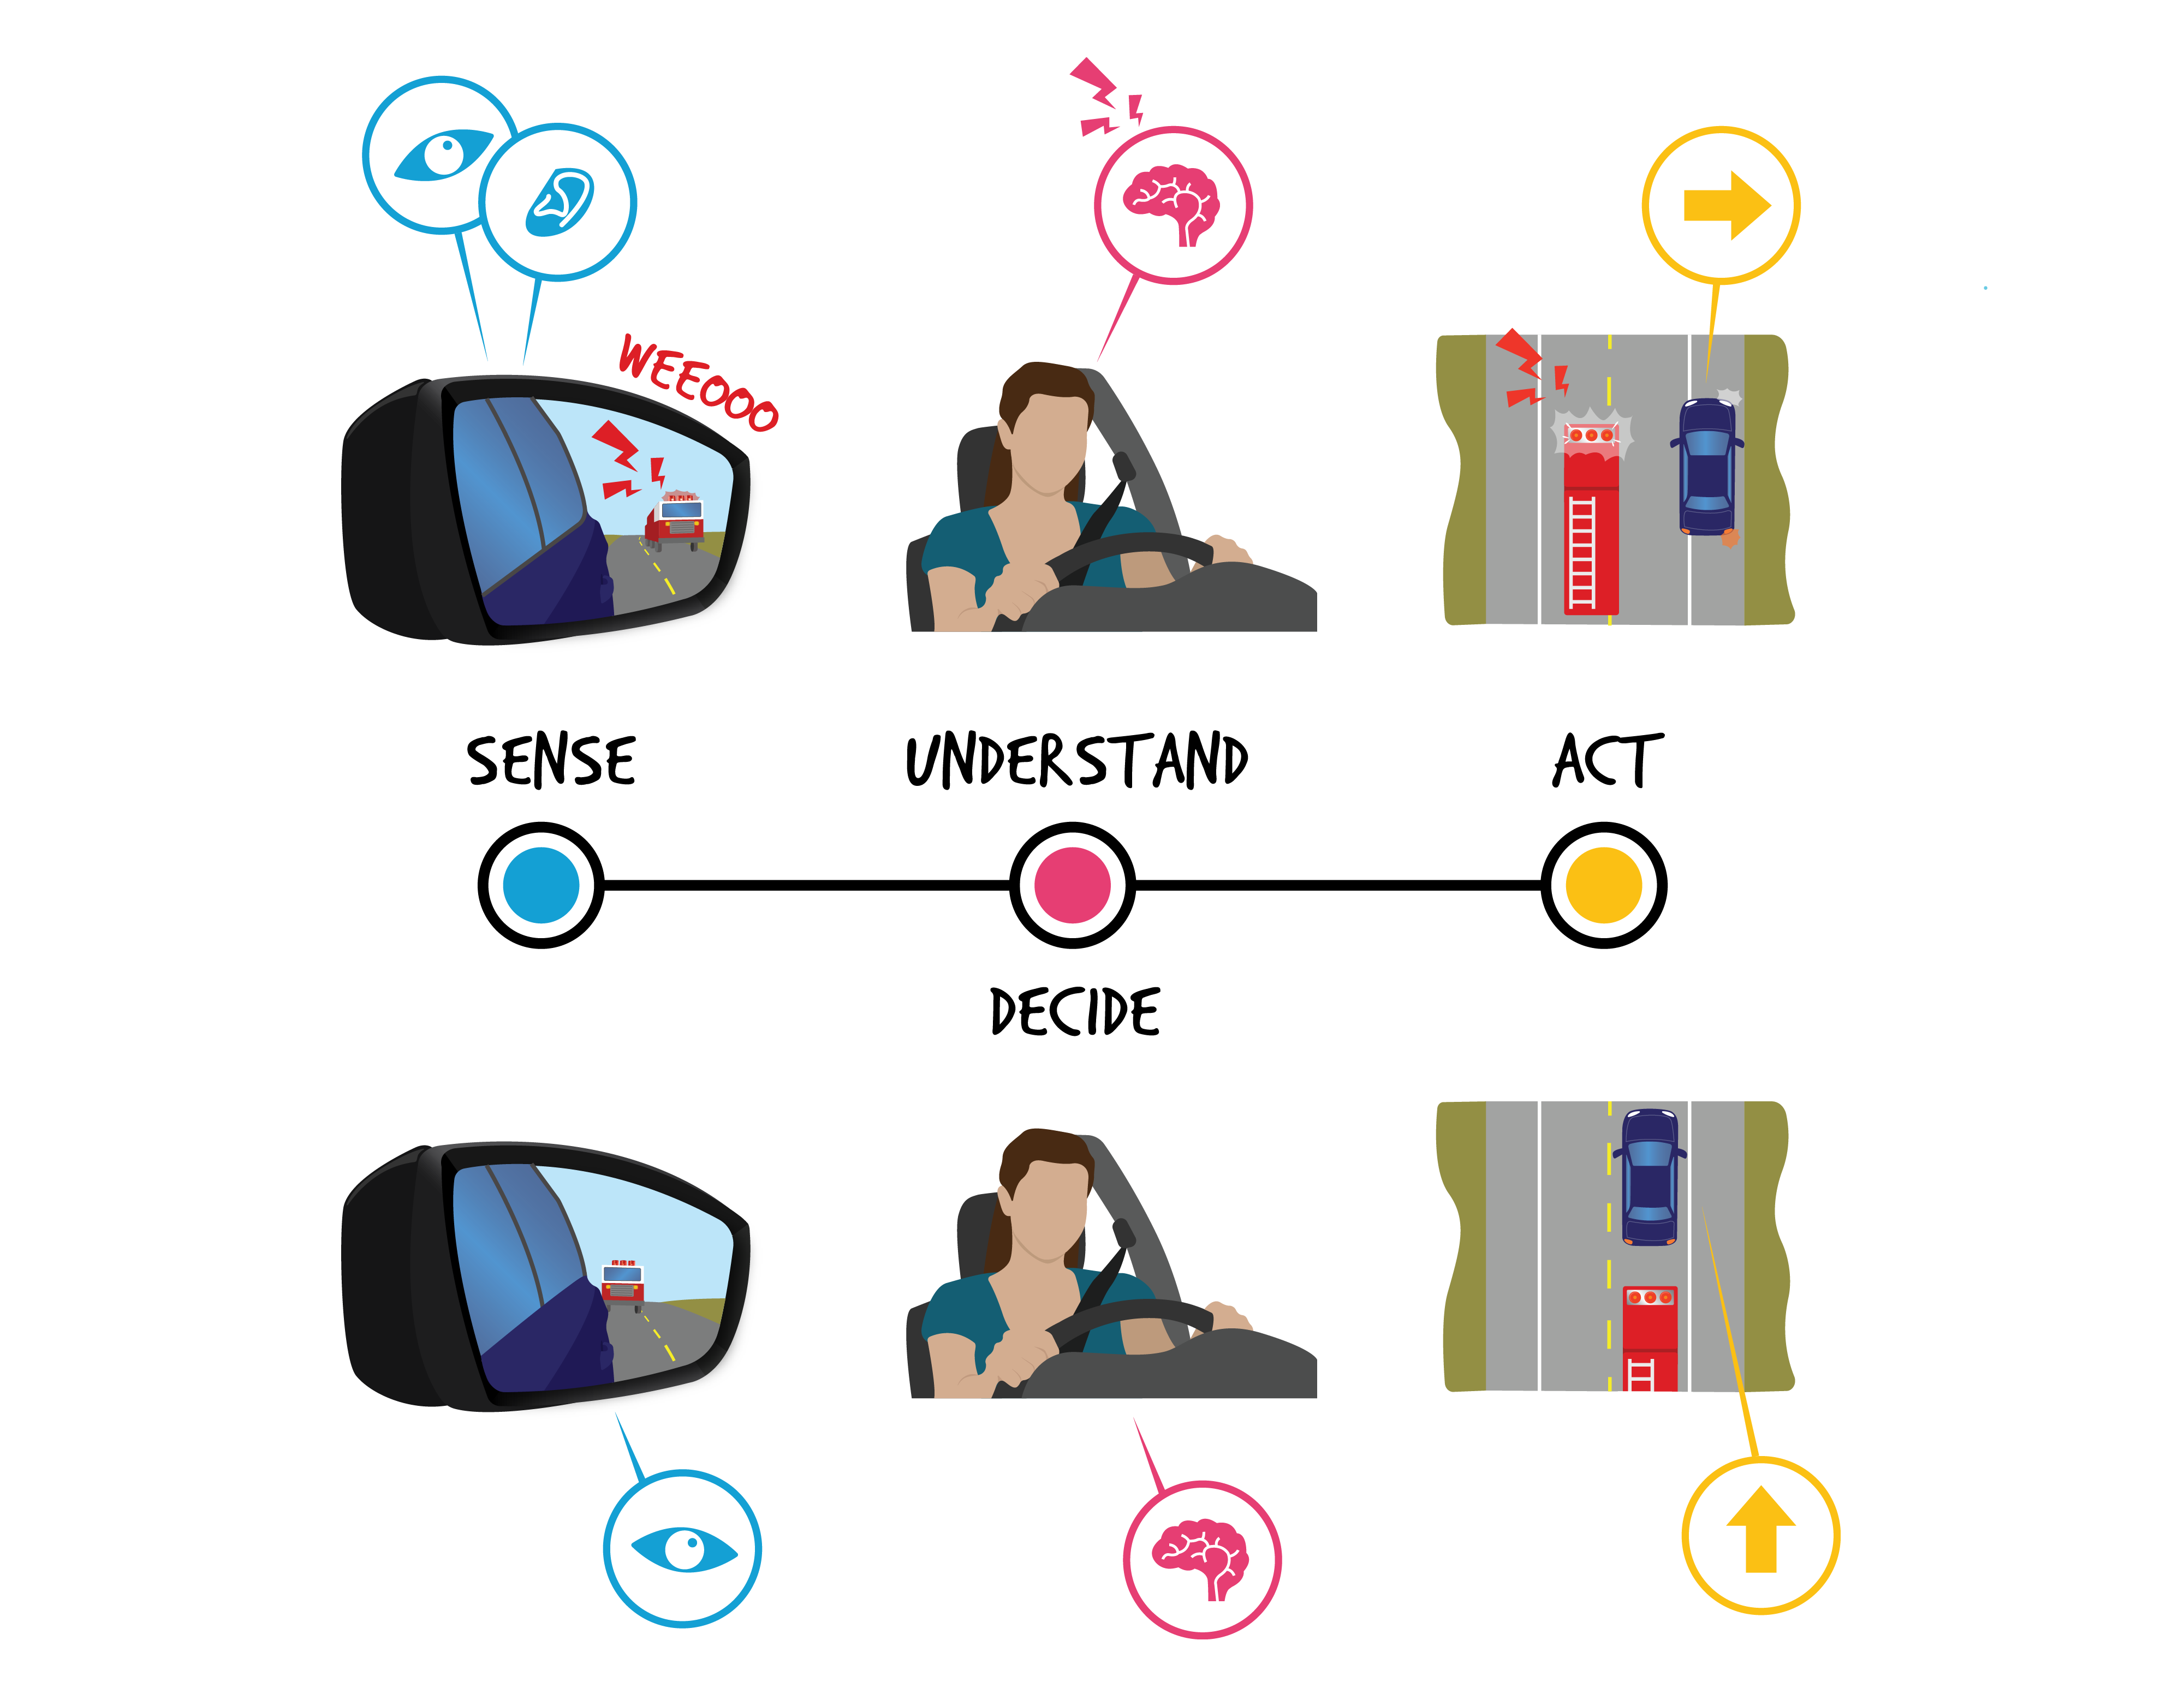 Car side mirror where a firetruck can be seen. 3 red electric symbols coming out of truck. Above mirror in red text is WEEOO, and 2 blue circles pointing to the mirror. The one on the left has an eye symbol, and the one on the right has an ear. Beside is a person driving a car. There is a pink circle with a brain inside pointing to the person. 3 pink electric symbols are above the circle. Above view of a street. In the left lane is a firetruck with 3 red electric symbols coming out. On the right lane, and slightly pulled over is a blue car with a yellow circle pointing to it. There is a yellow arrow pointing right inside. Below the images is a line with 3 circles. On the left end is a blue circle with the word Sense, in the middle is a pink circle with the words Understand and Decide, and on the right end is a yellow circle with the word Act. Under the line, the 3 images are repeated with slight changes. The firetruck can be seen in the mirror, but it is following behind and doesn't have sirens on. There is only the circle with the eye. The image of the person driving is the same, minus the electric symbols coming out of the circle. The final image the firetruck is following behind the blue care. And the circle from the car has an arrow pointing straight.